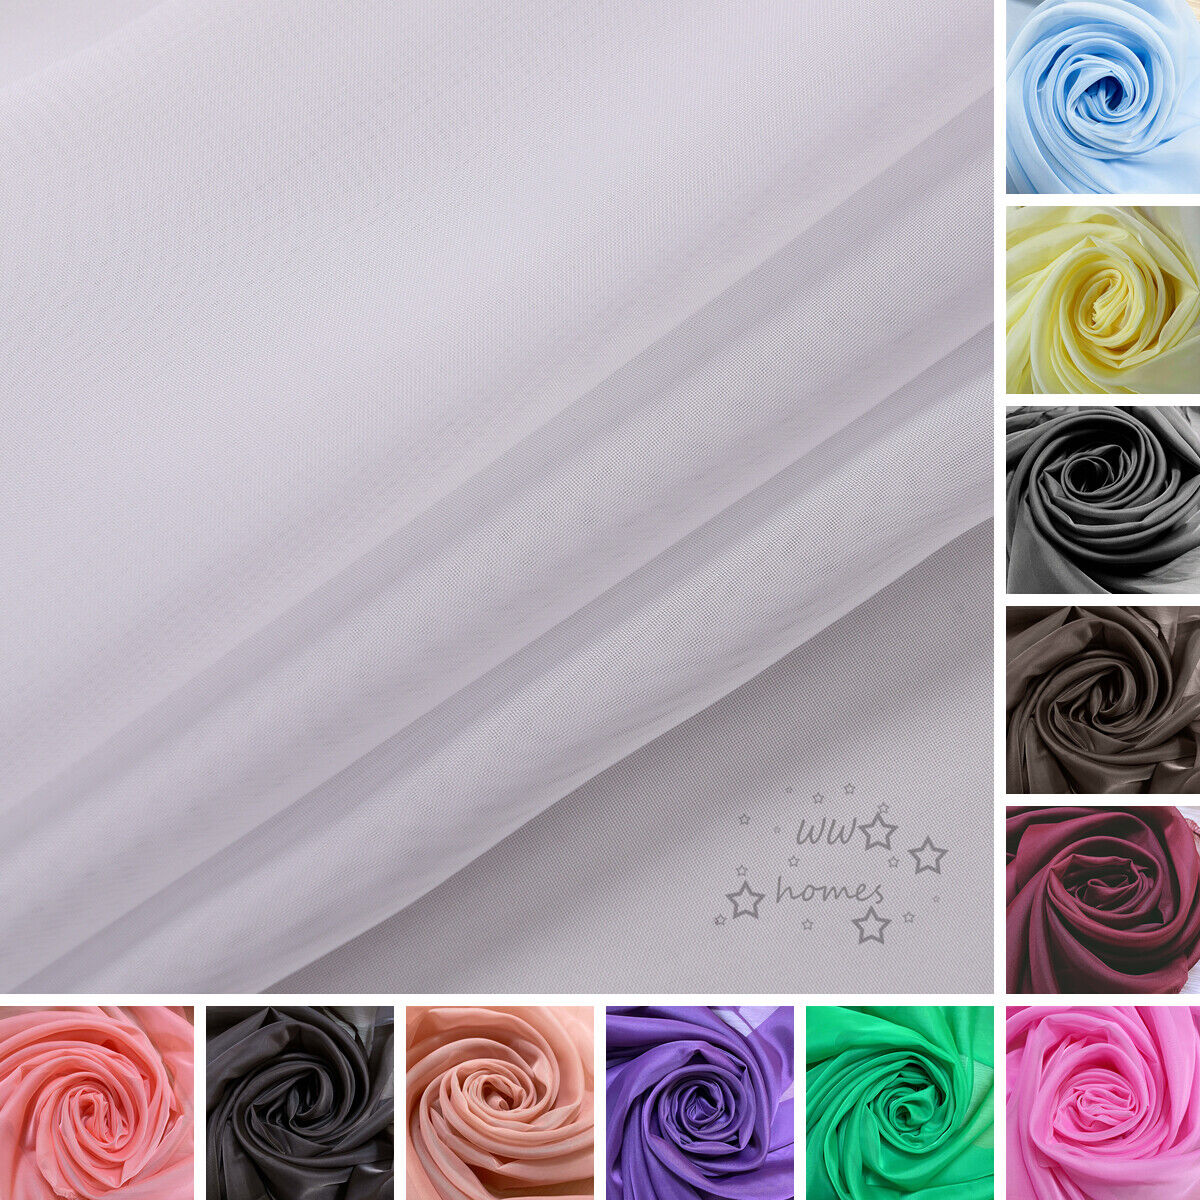 58" wide sheer voile fabric wedding decoration drape, DIY material by meter